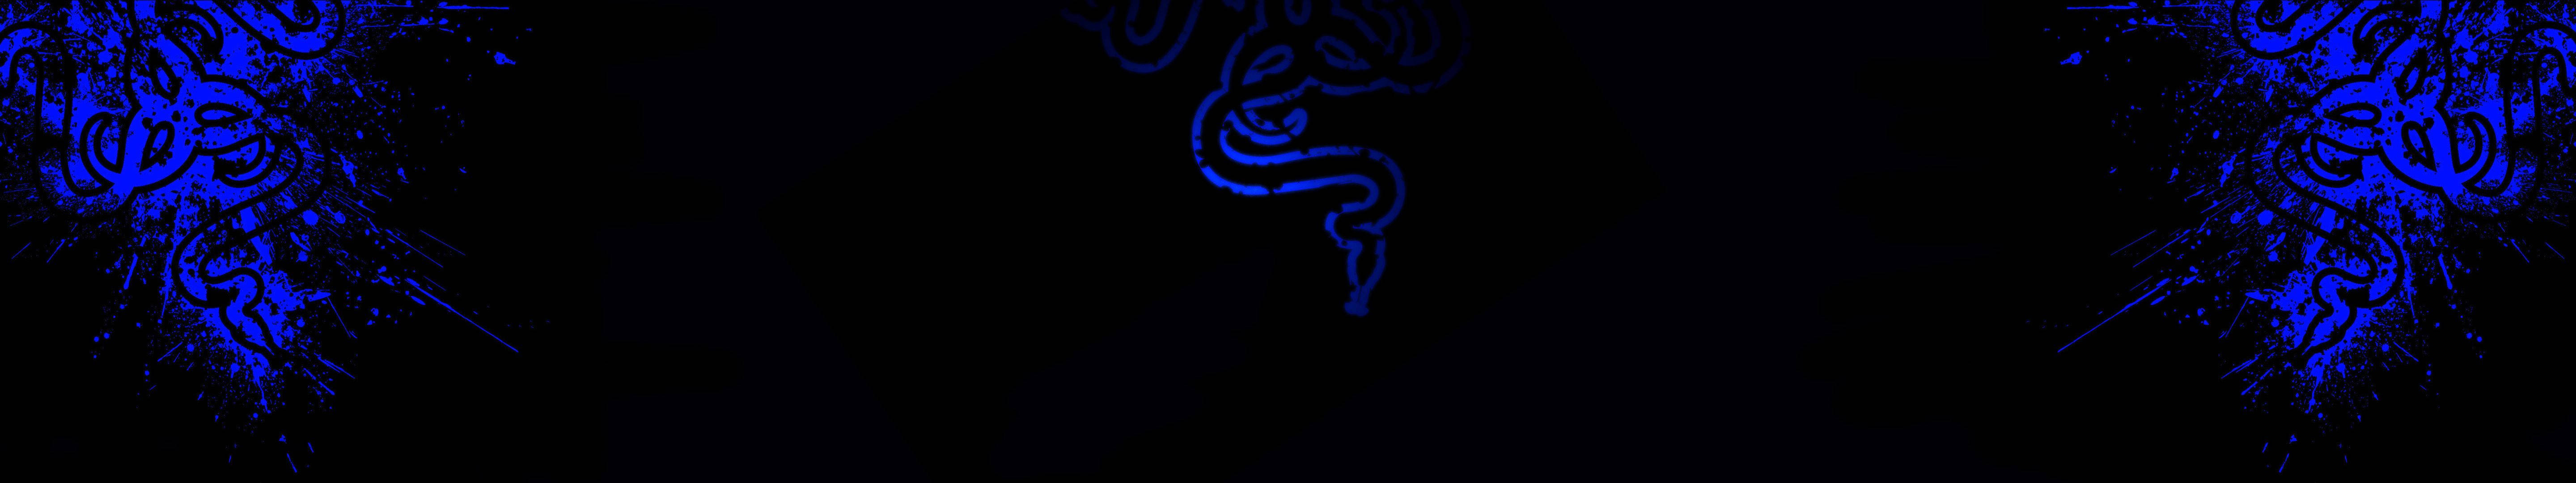 Blue Abstract Snakes Three Screen Wallpaper